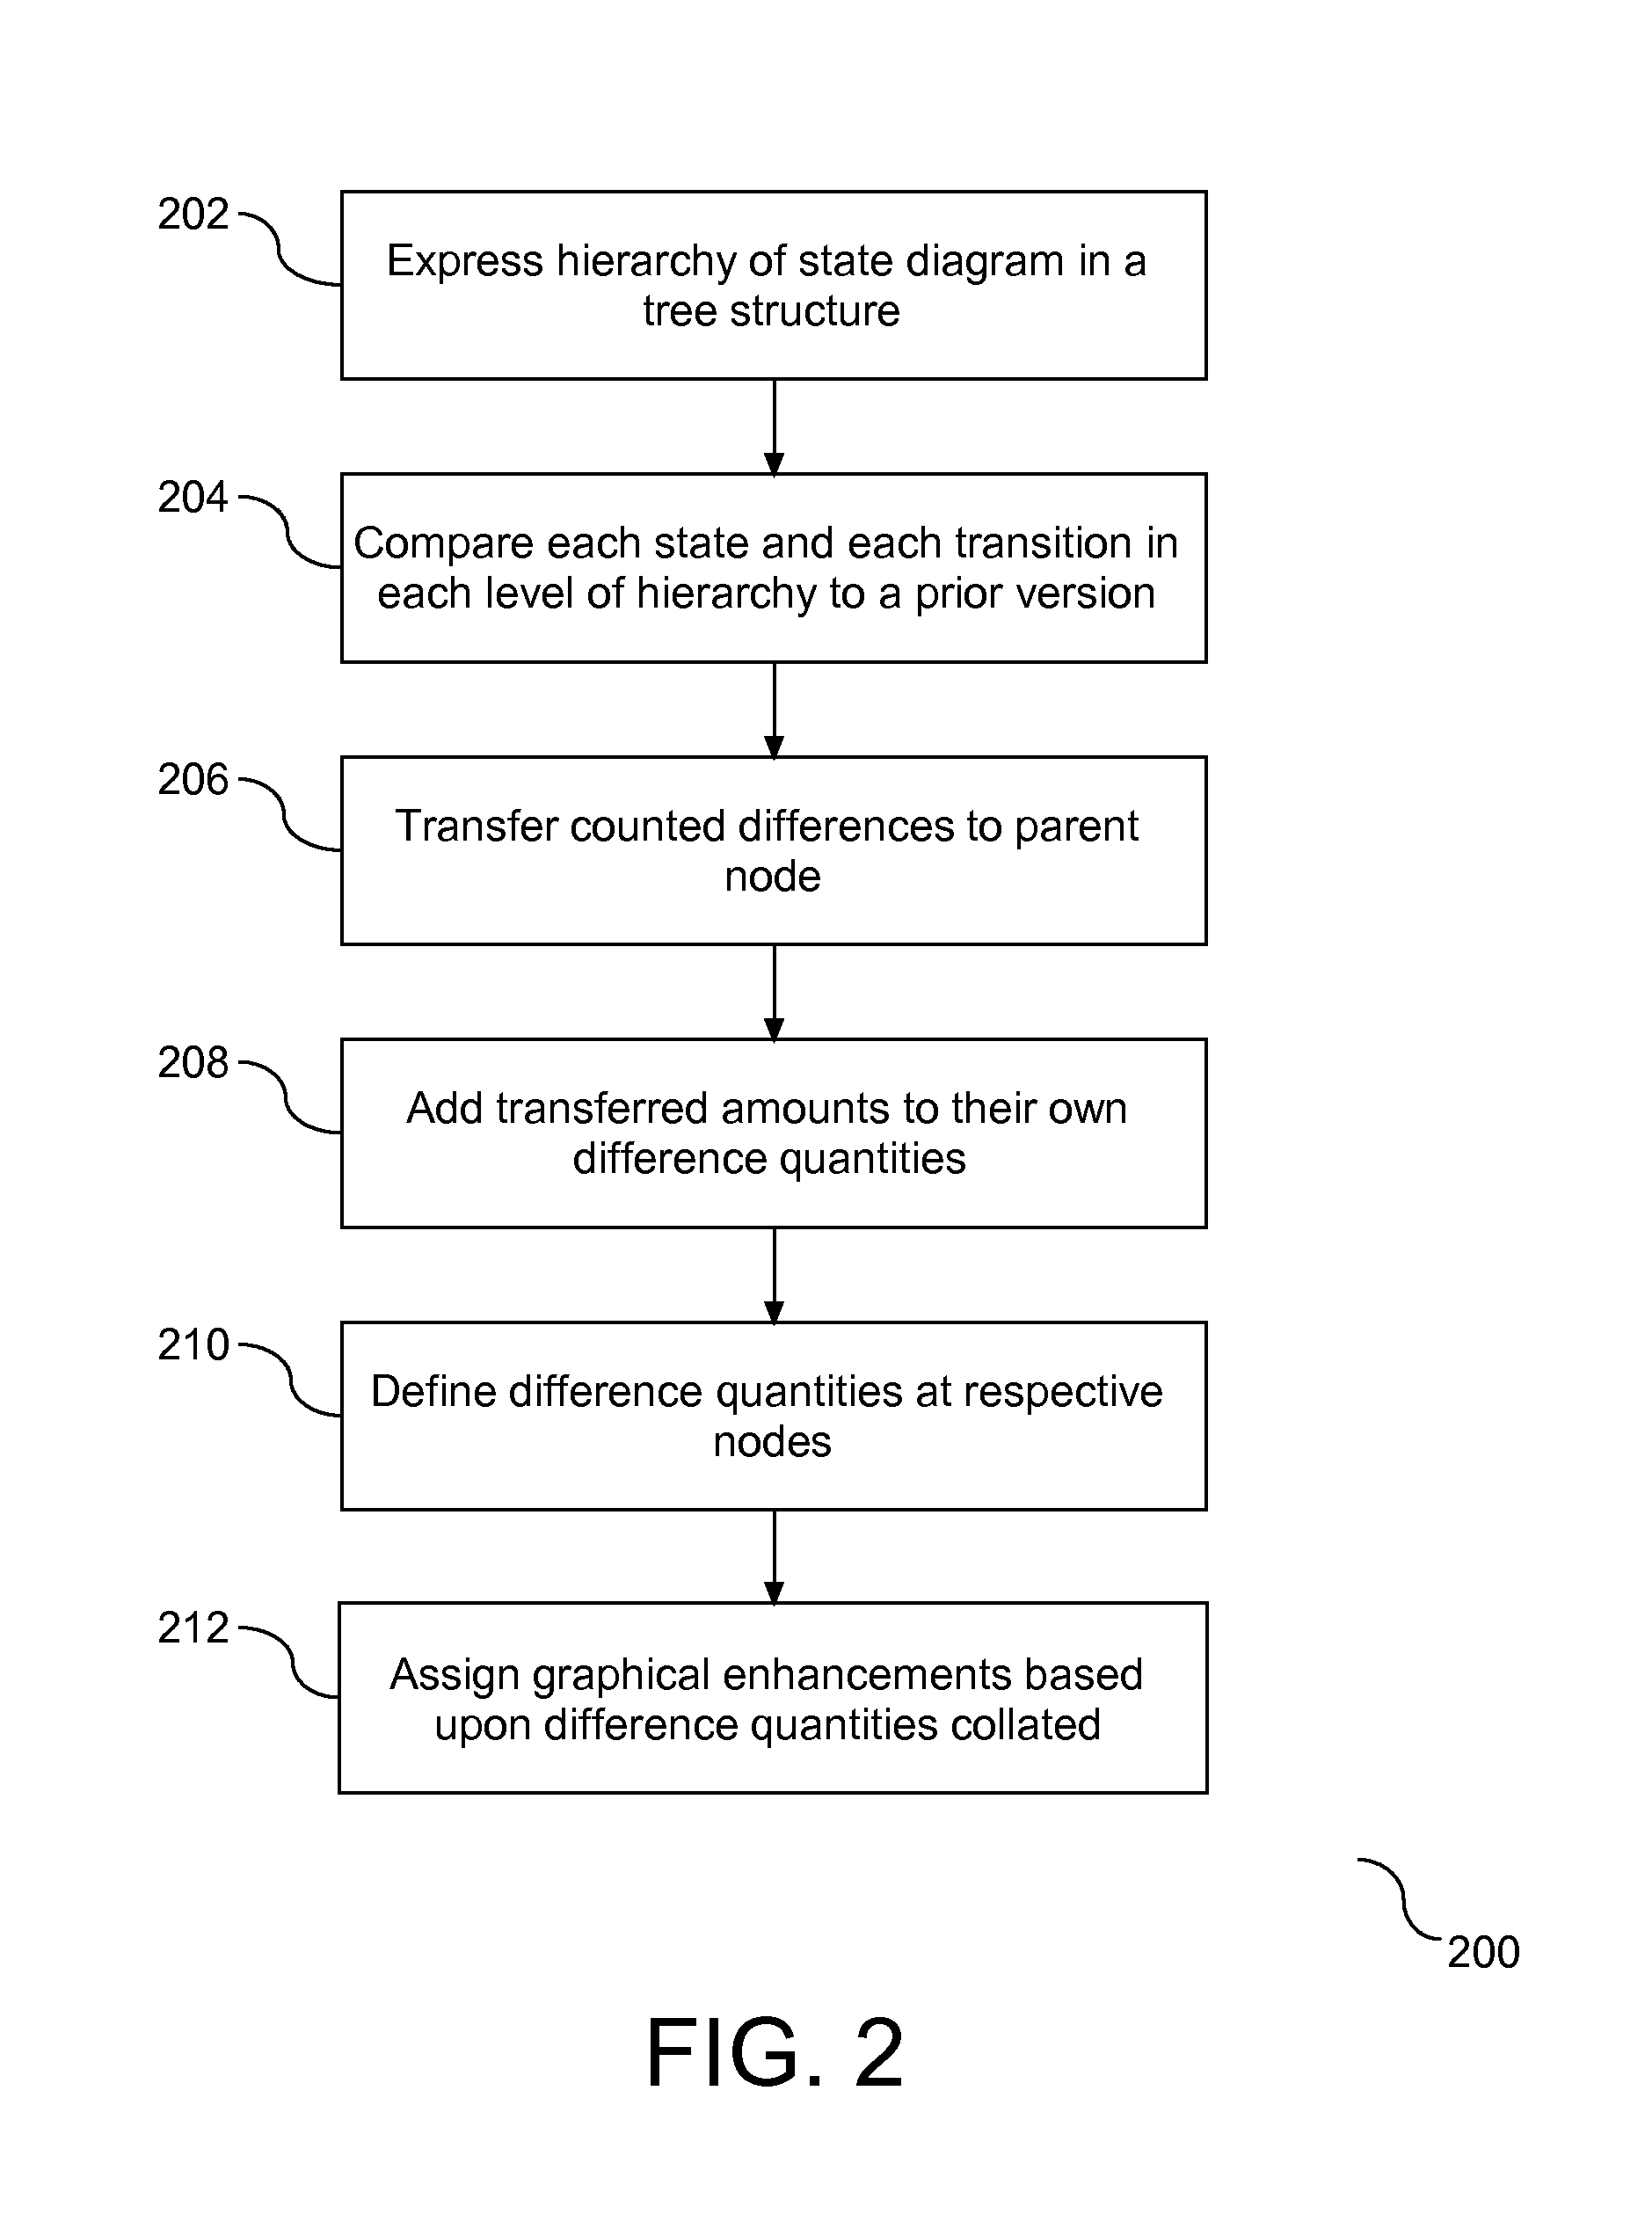 Method of Visualizing Modifications of a Hierarchical State Diagram